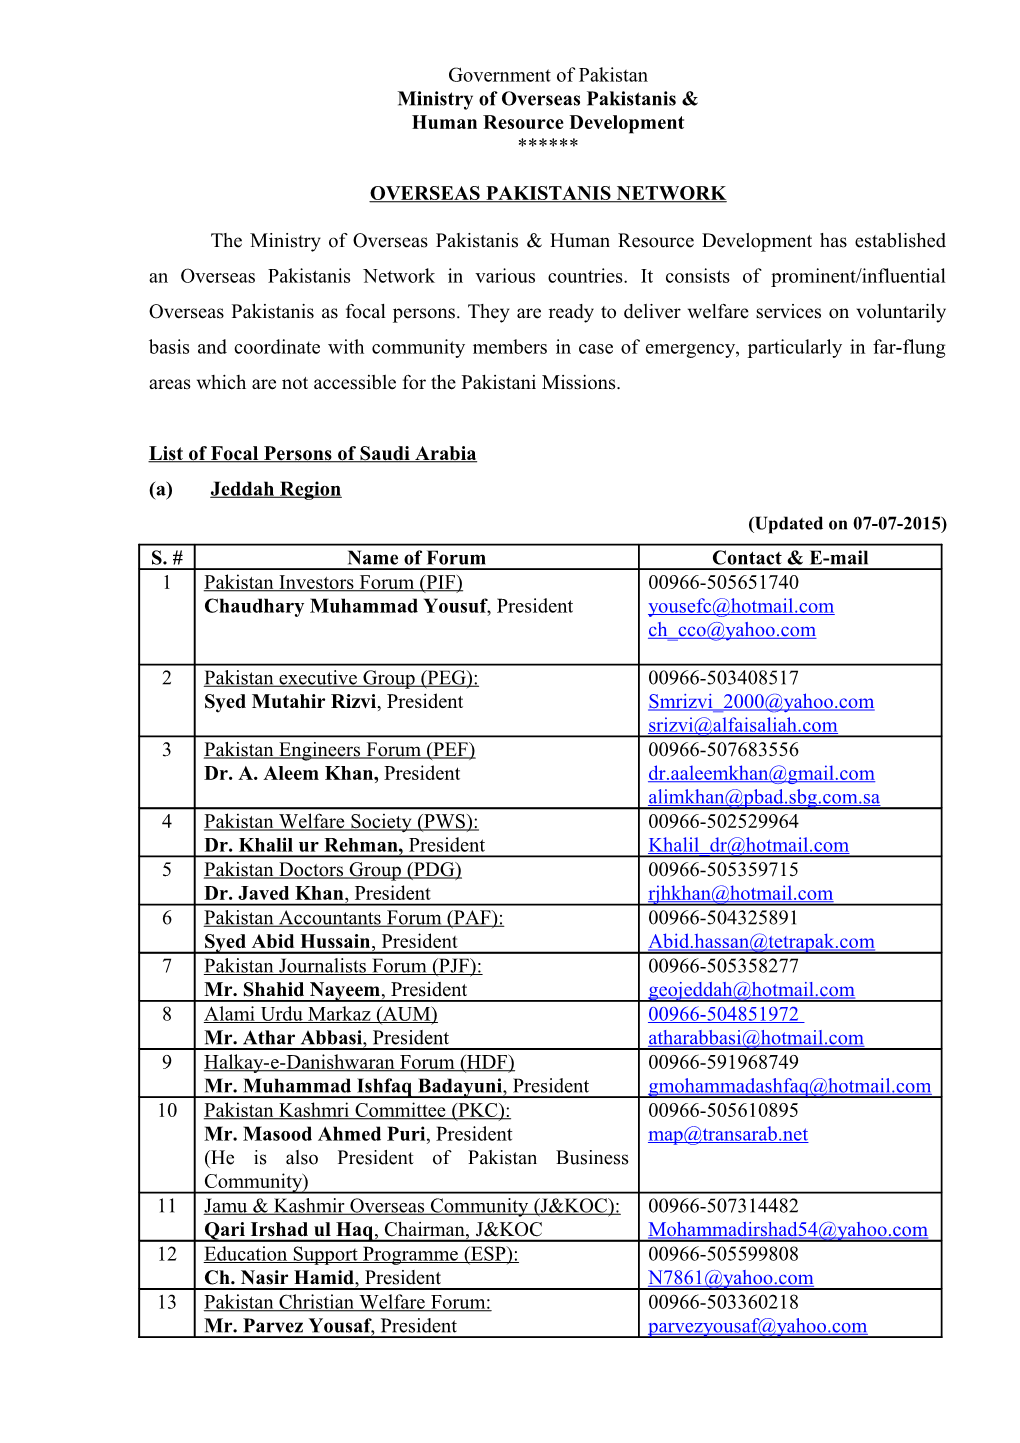 List of Focal Persons Kingdom of Bahrain